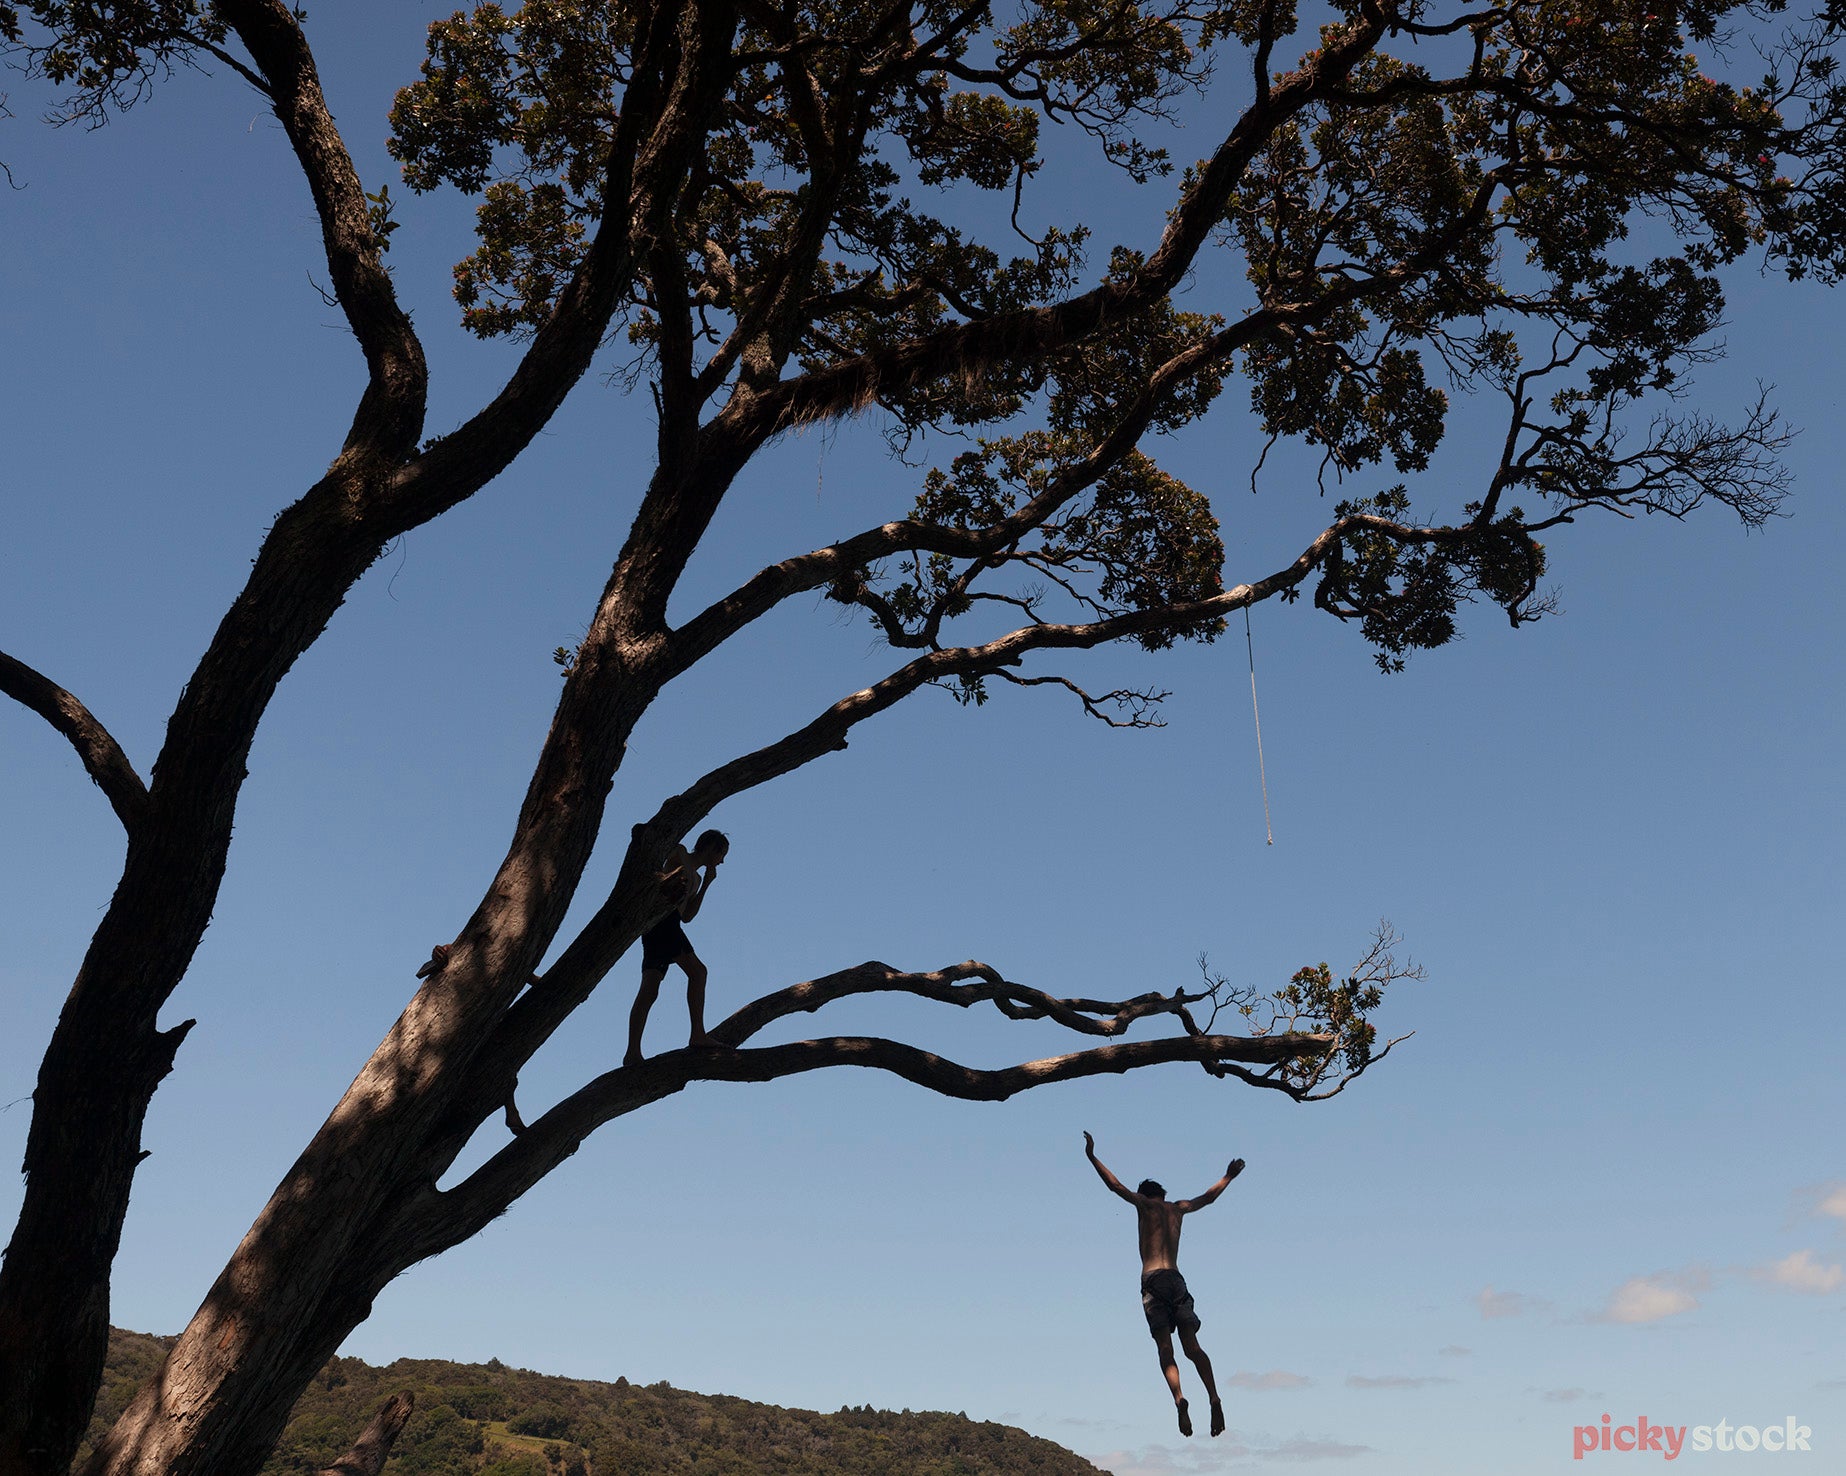 Boy diving from large pōhutakawa into estuary. Another boy in the tree climbing, ready to have a turn. 